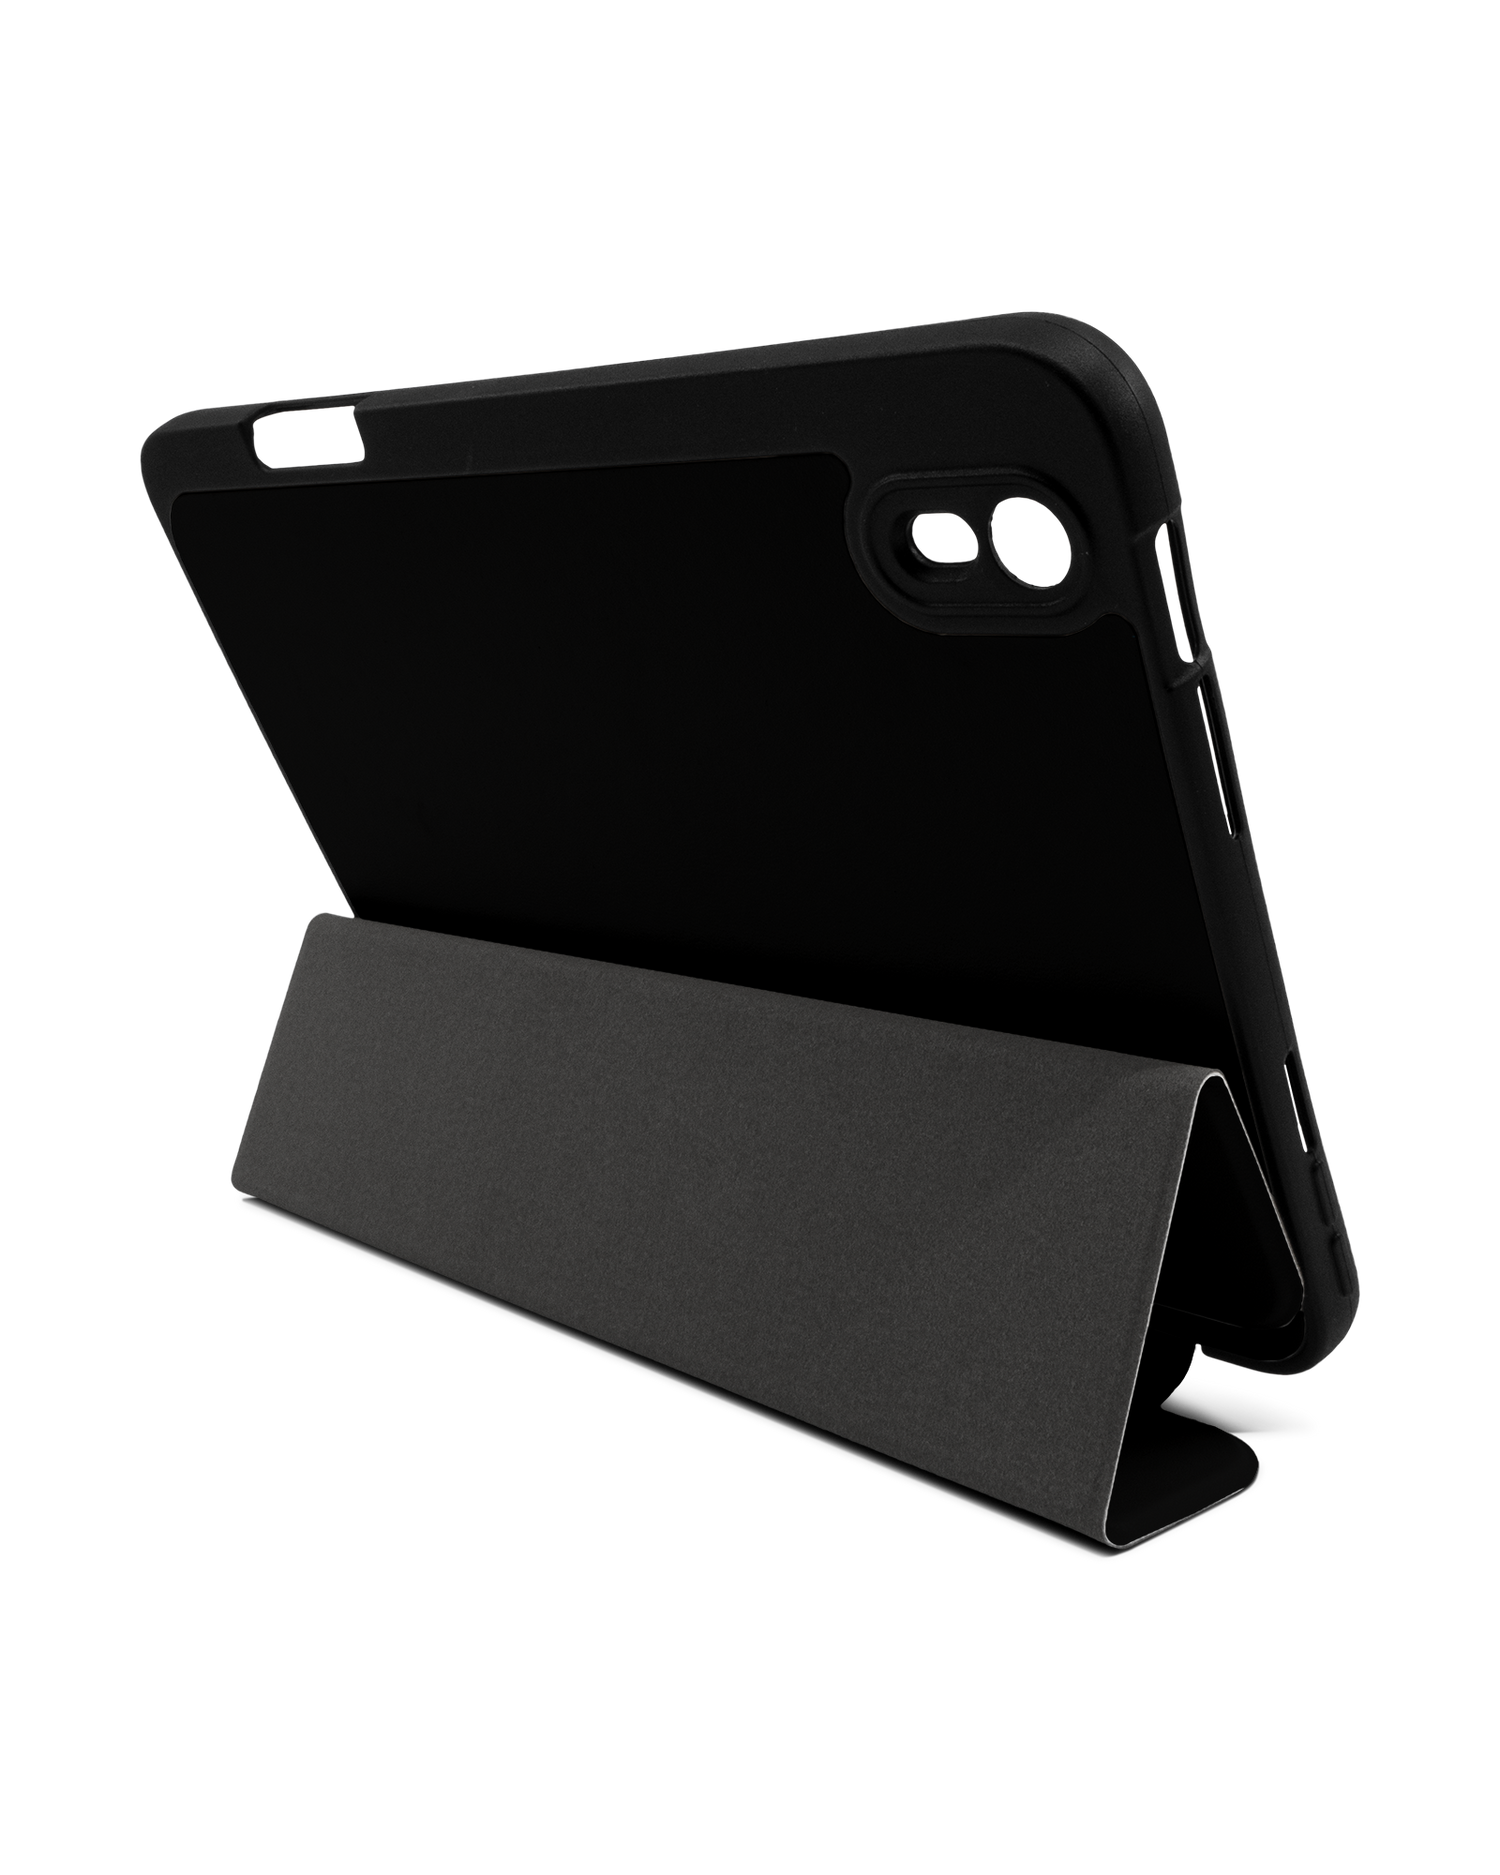 BLACK iPad Case with Pencil Holder Apple iPad mini 6 (2021): Set up in landscape format (back view)